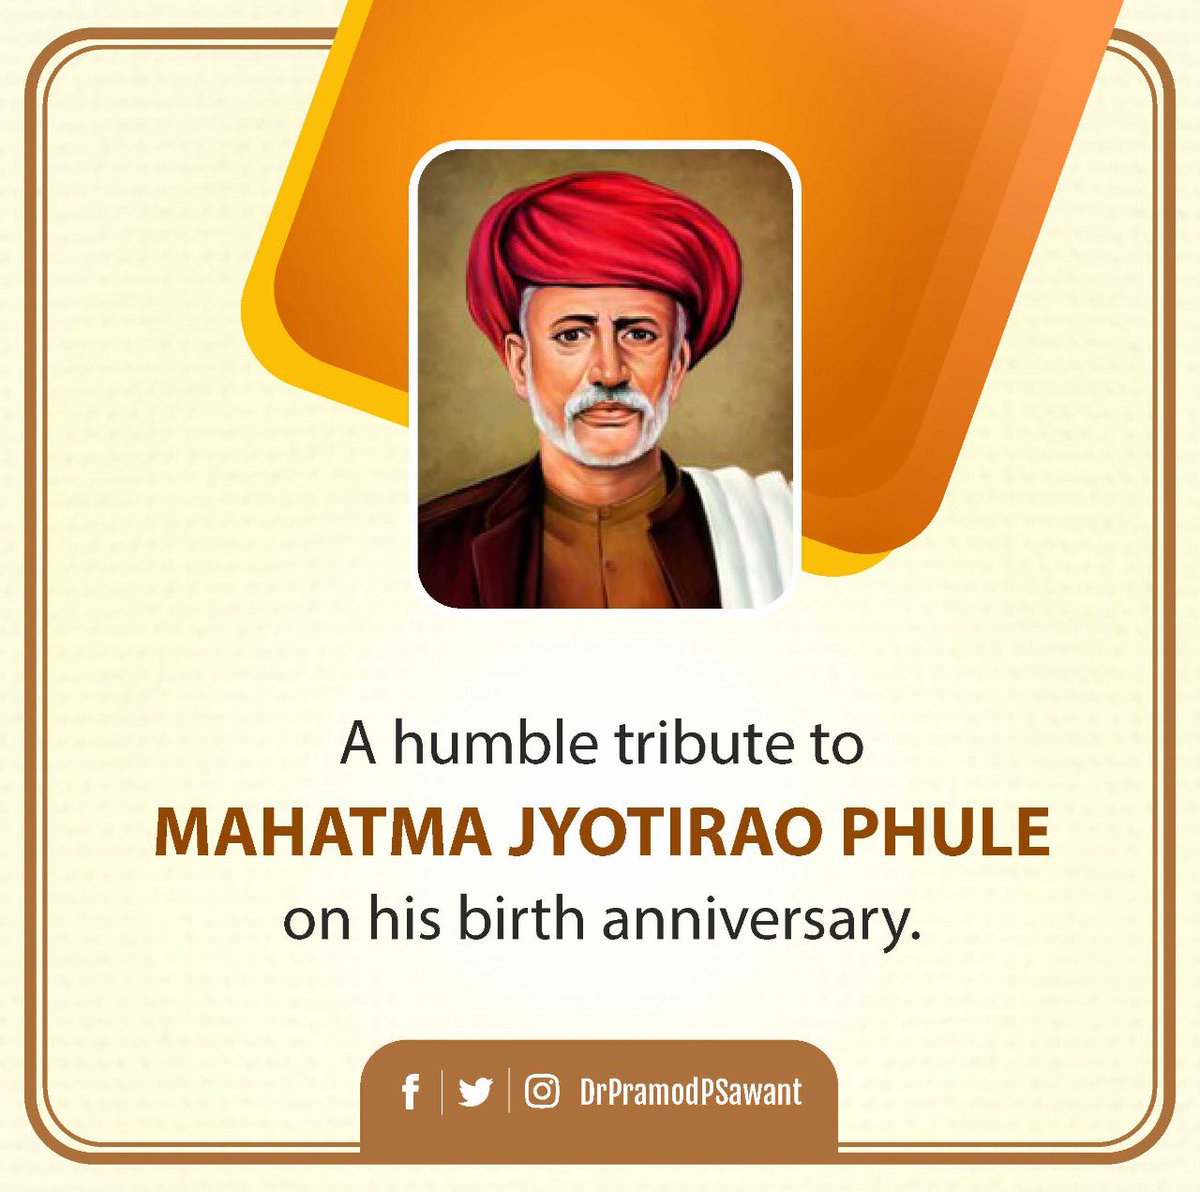 A humble tribute to #MahatmaJyotiraoPhule on his birth anniversary. He was a pioneer behind initiating the revolution to enable women's education.